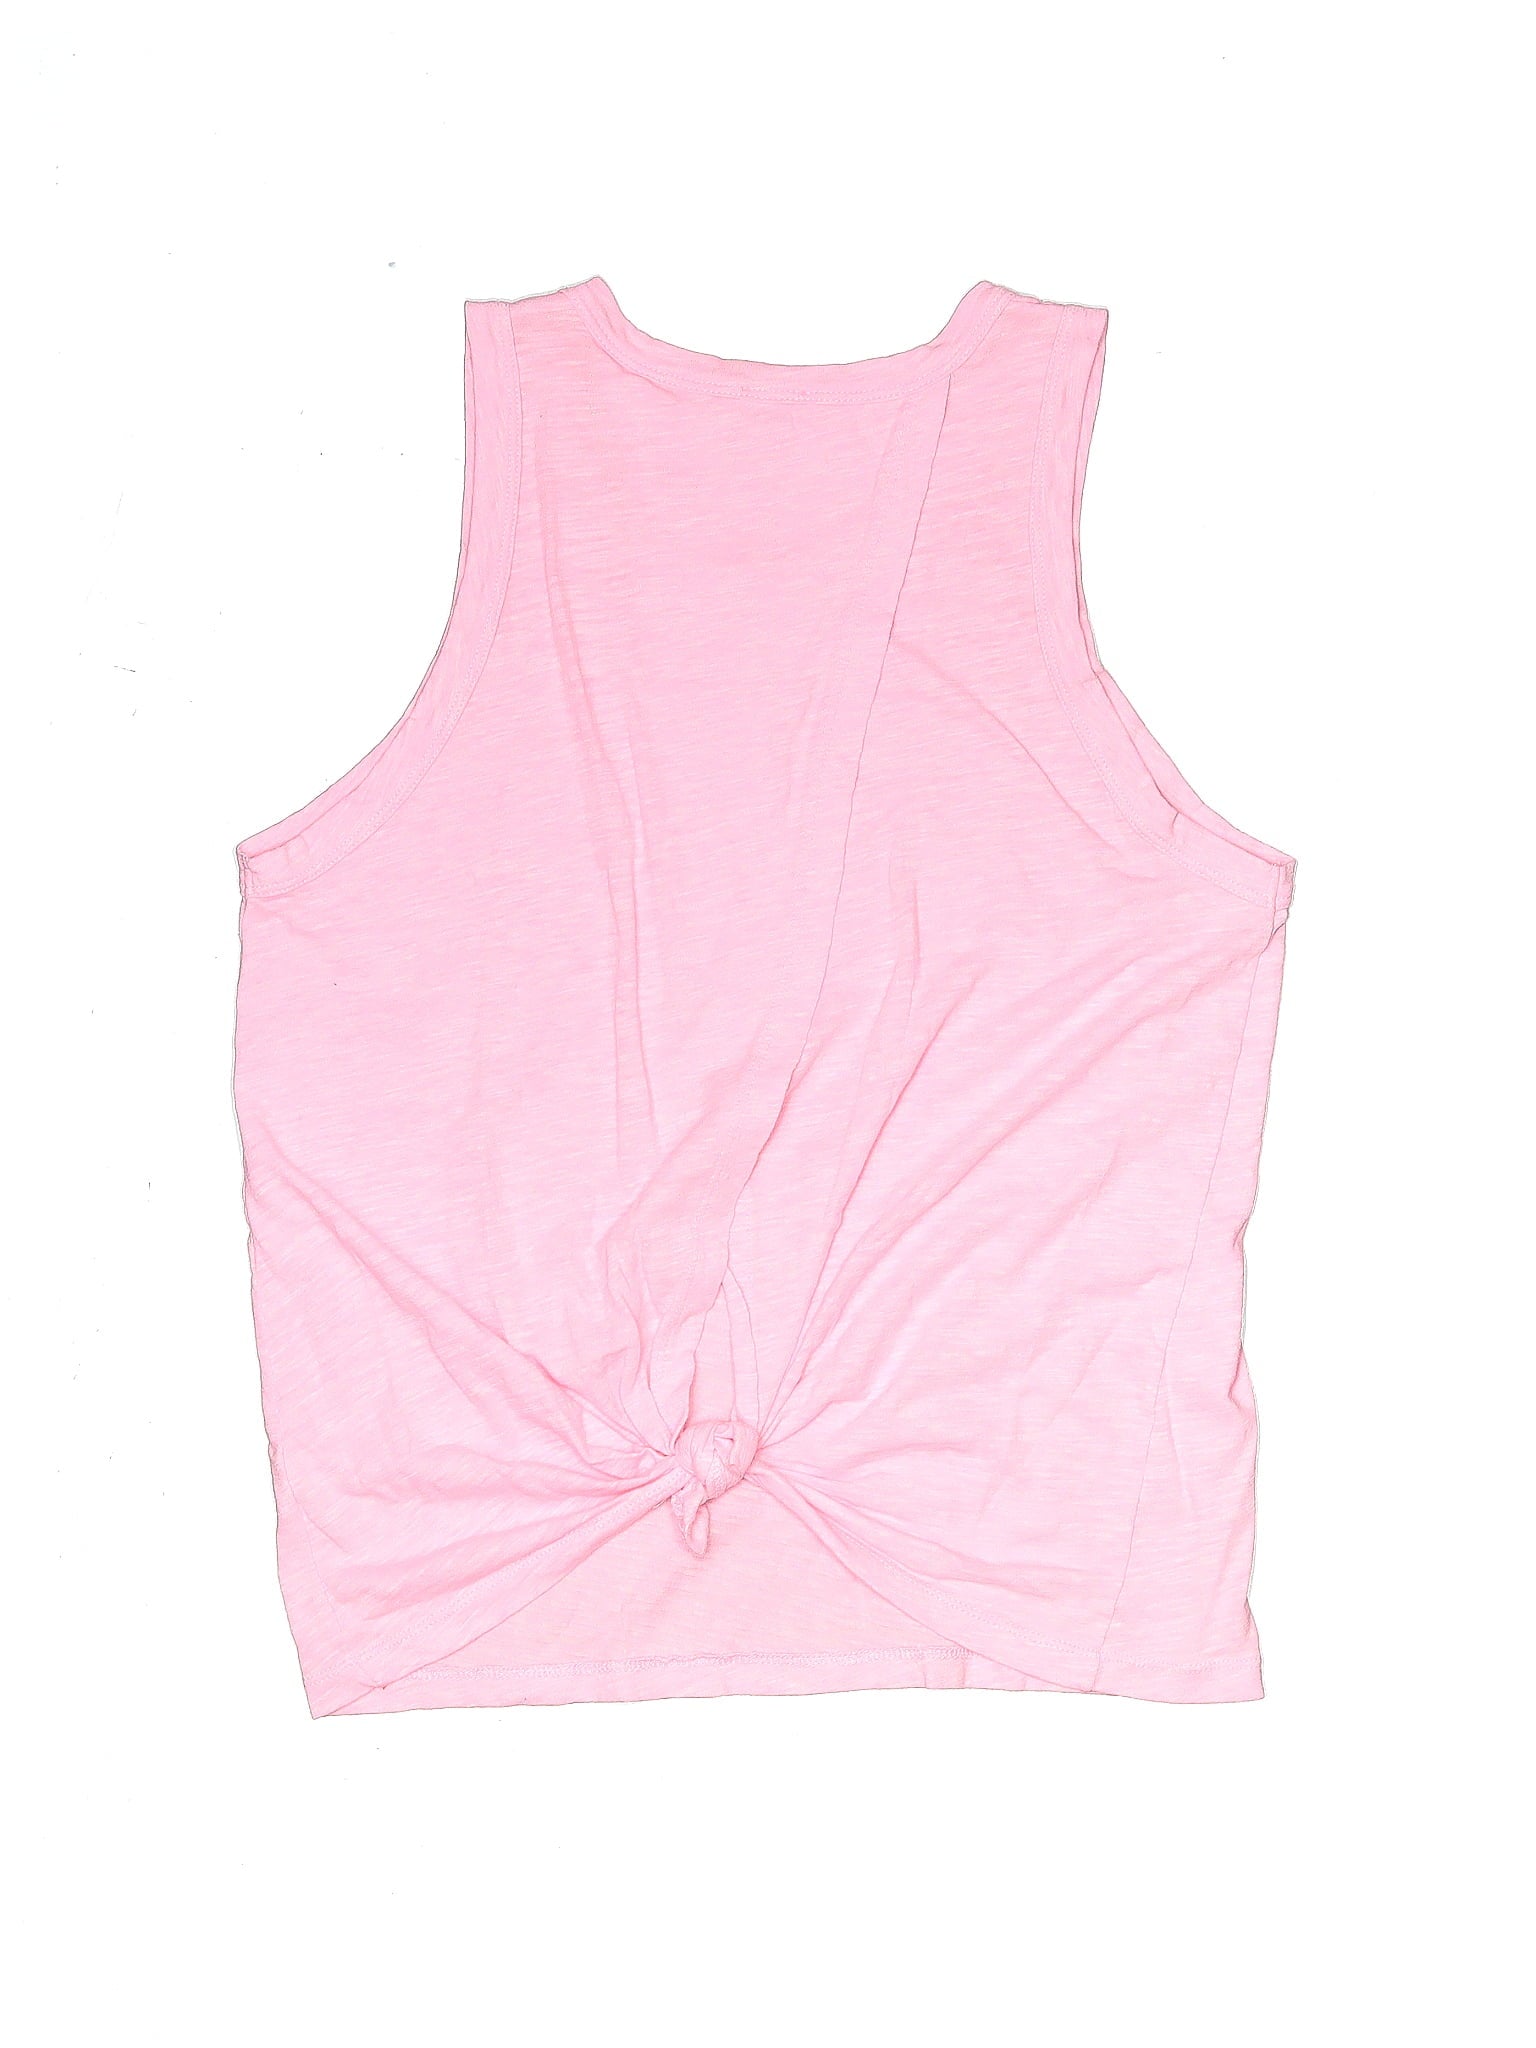 Tank Top size - M (Youth)